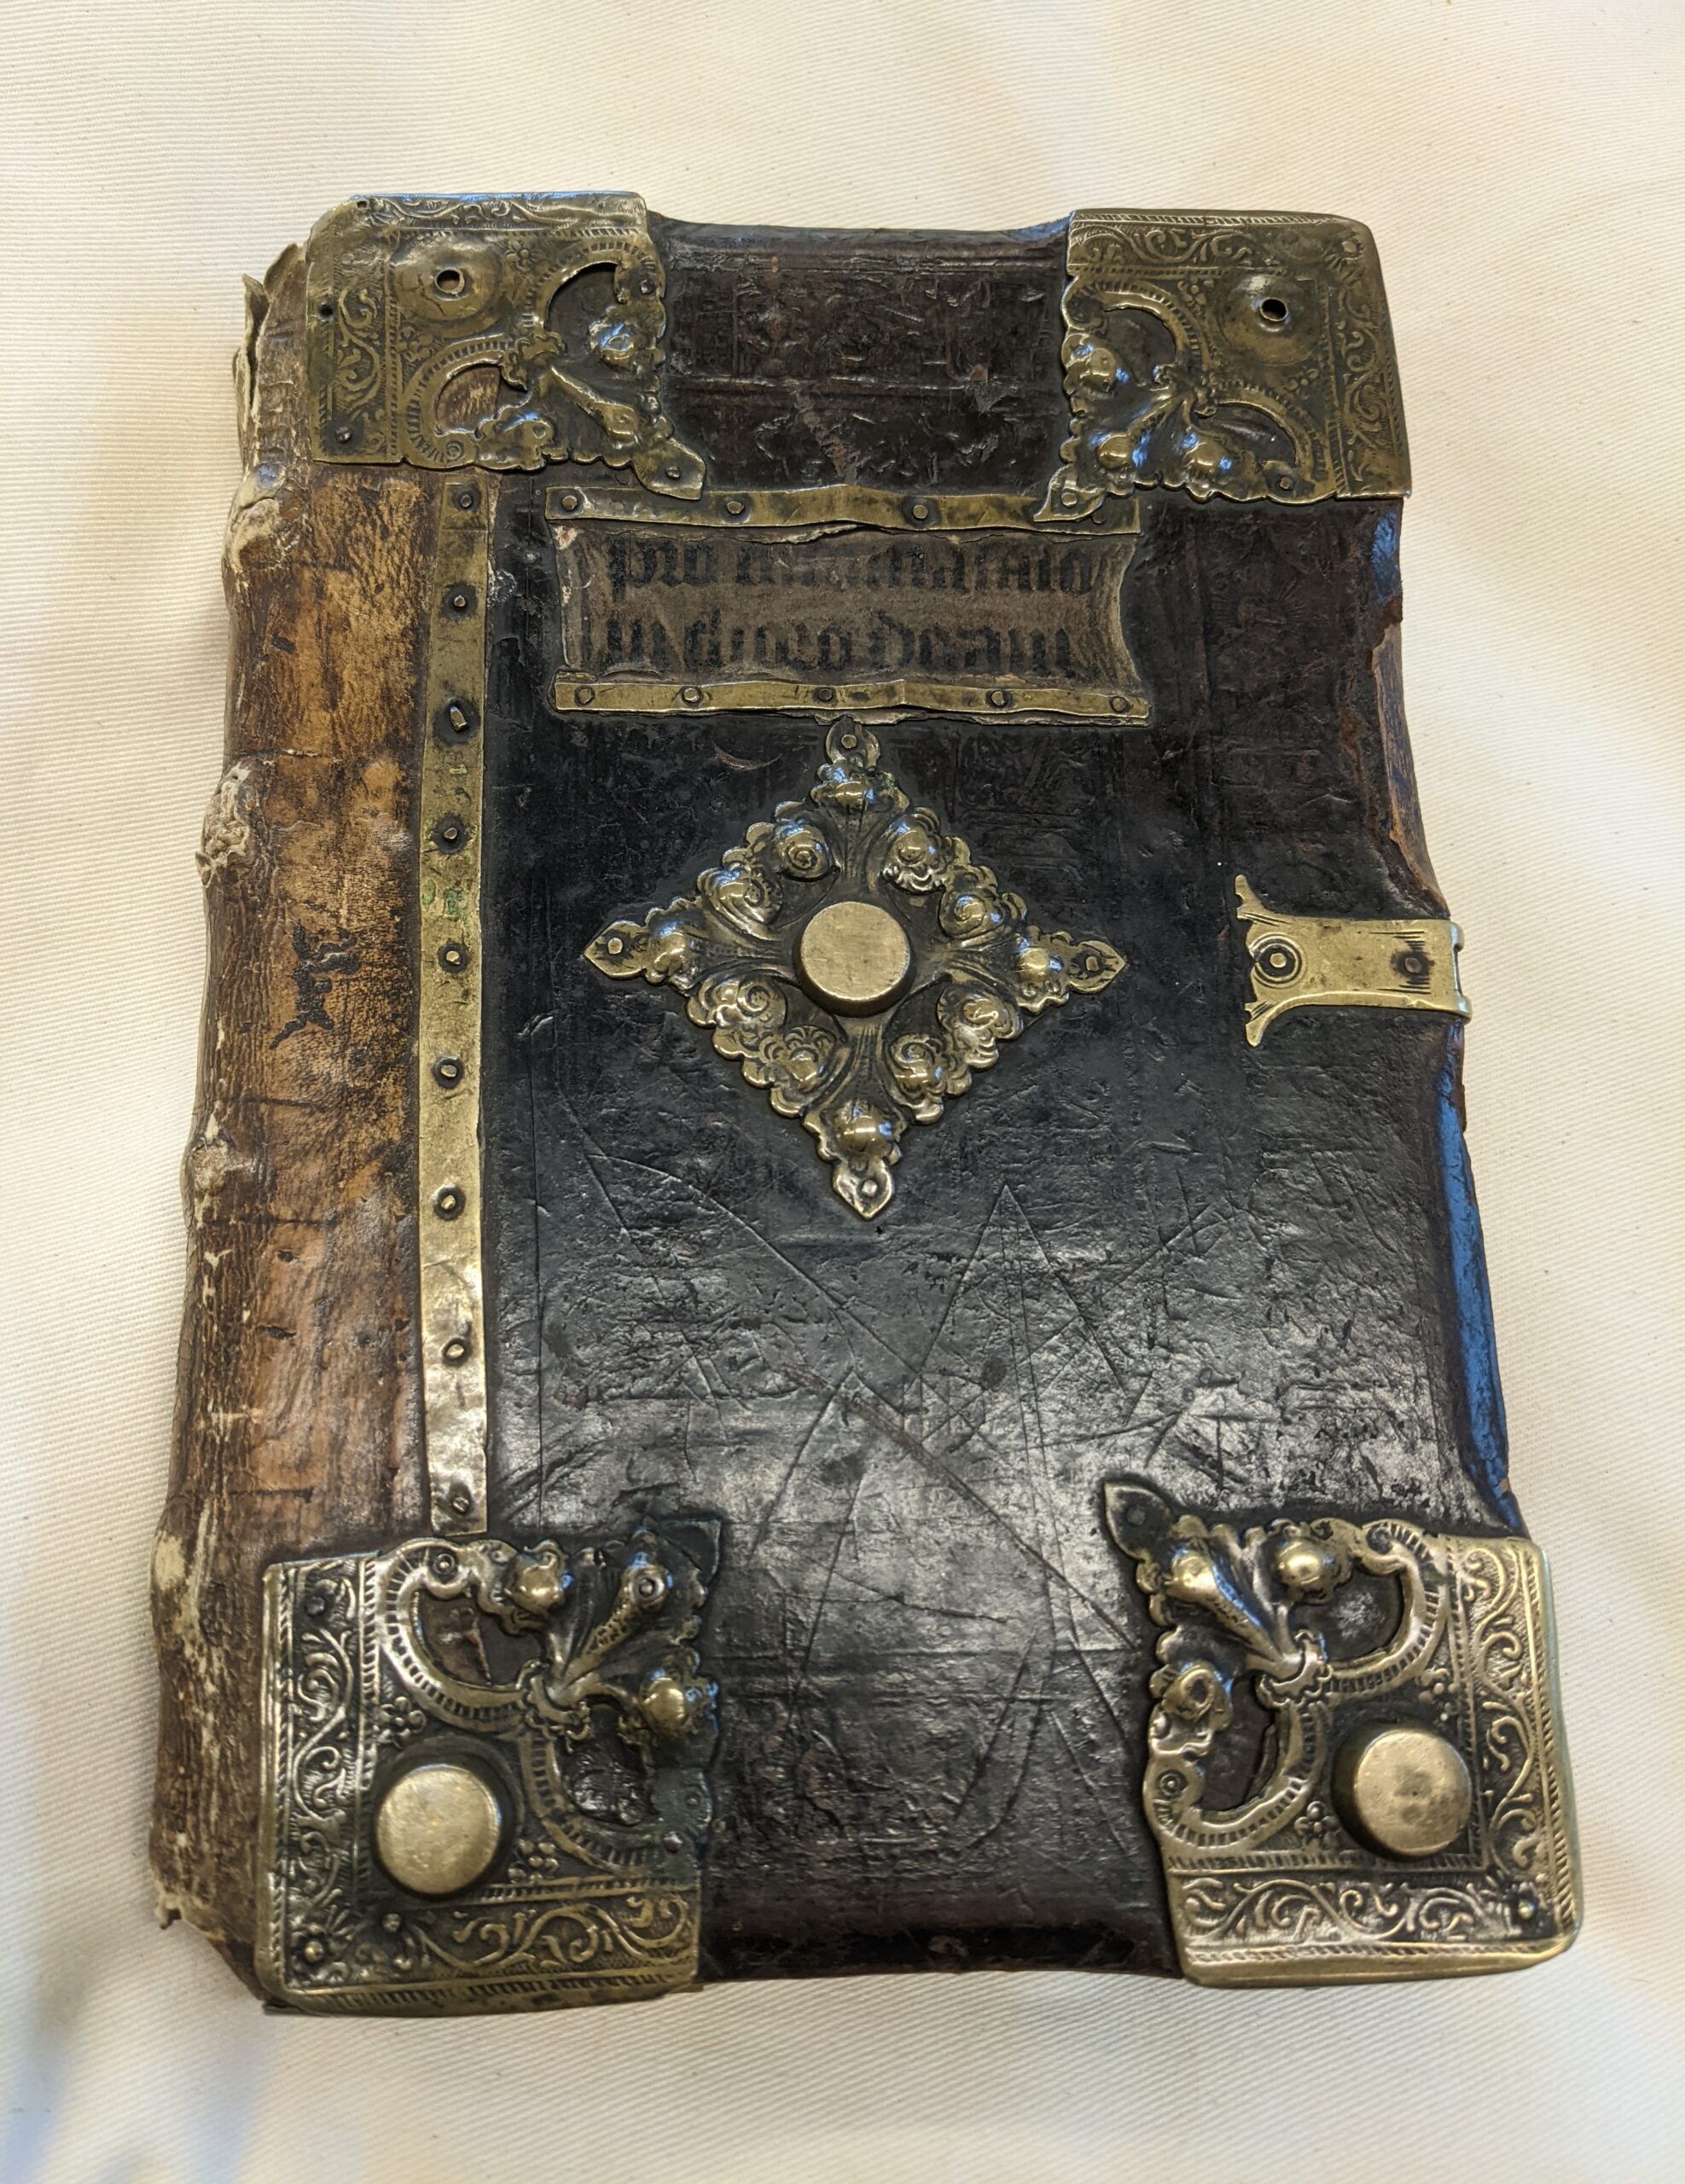 An old book with a wooden and leather cover, with metal pieces on the corners, in the center, and with a clasp